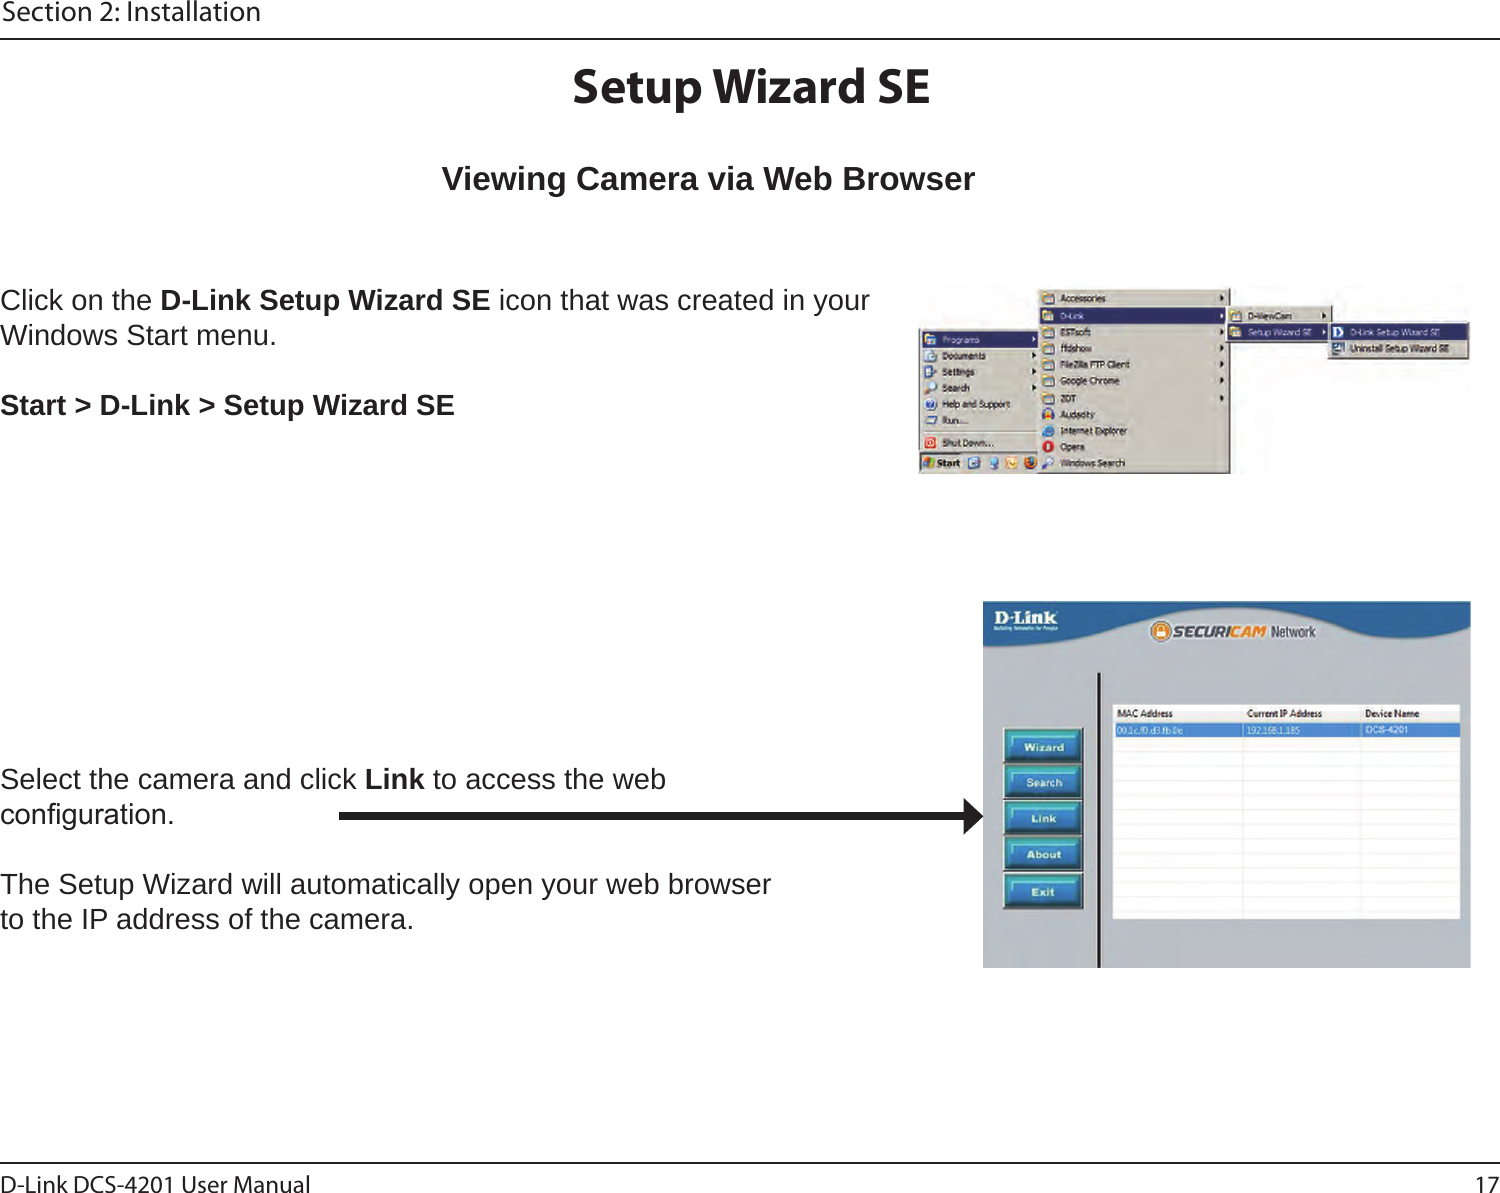 17D-Link DCS-4201 User ManualSection 2: InstallationSetup Wizard SEClick on the D-Link Setup Wizard SE icon that was created in your Windows Start menu.Start &gt; D-Link &gt; Setup Wizard SEViewing Camera via Web BrowserSelect the camera and click Link to access the web conguration. The Setup Wizard will automatically open your web browser to the IP address of the camera.